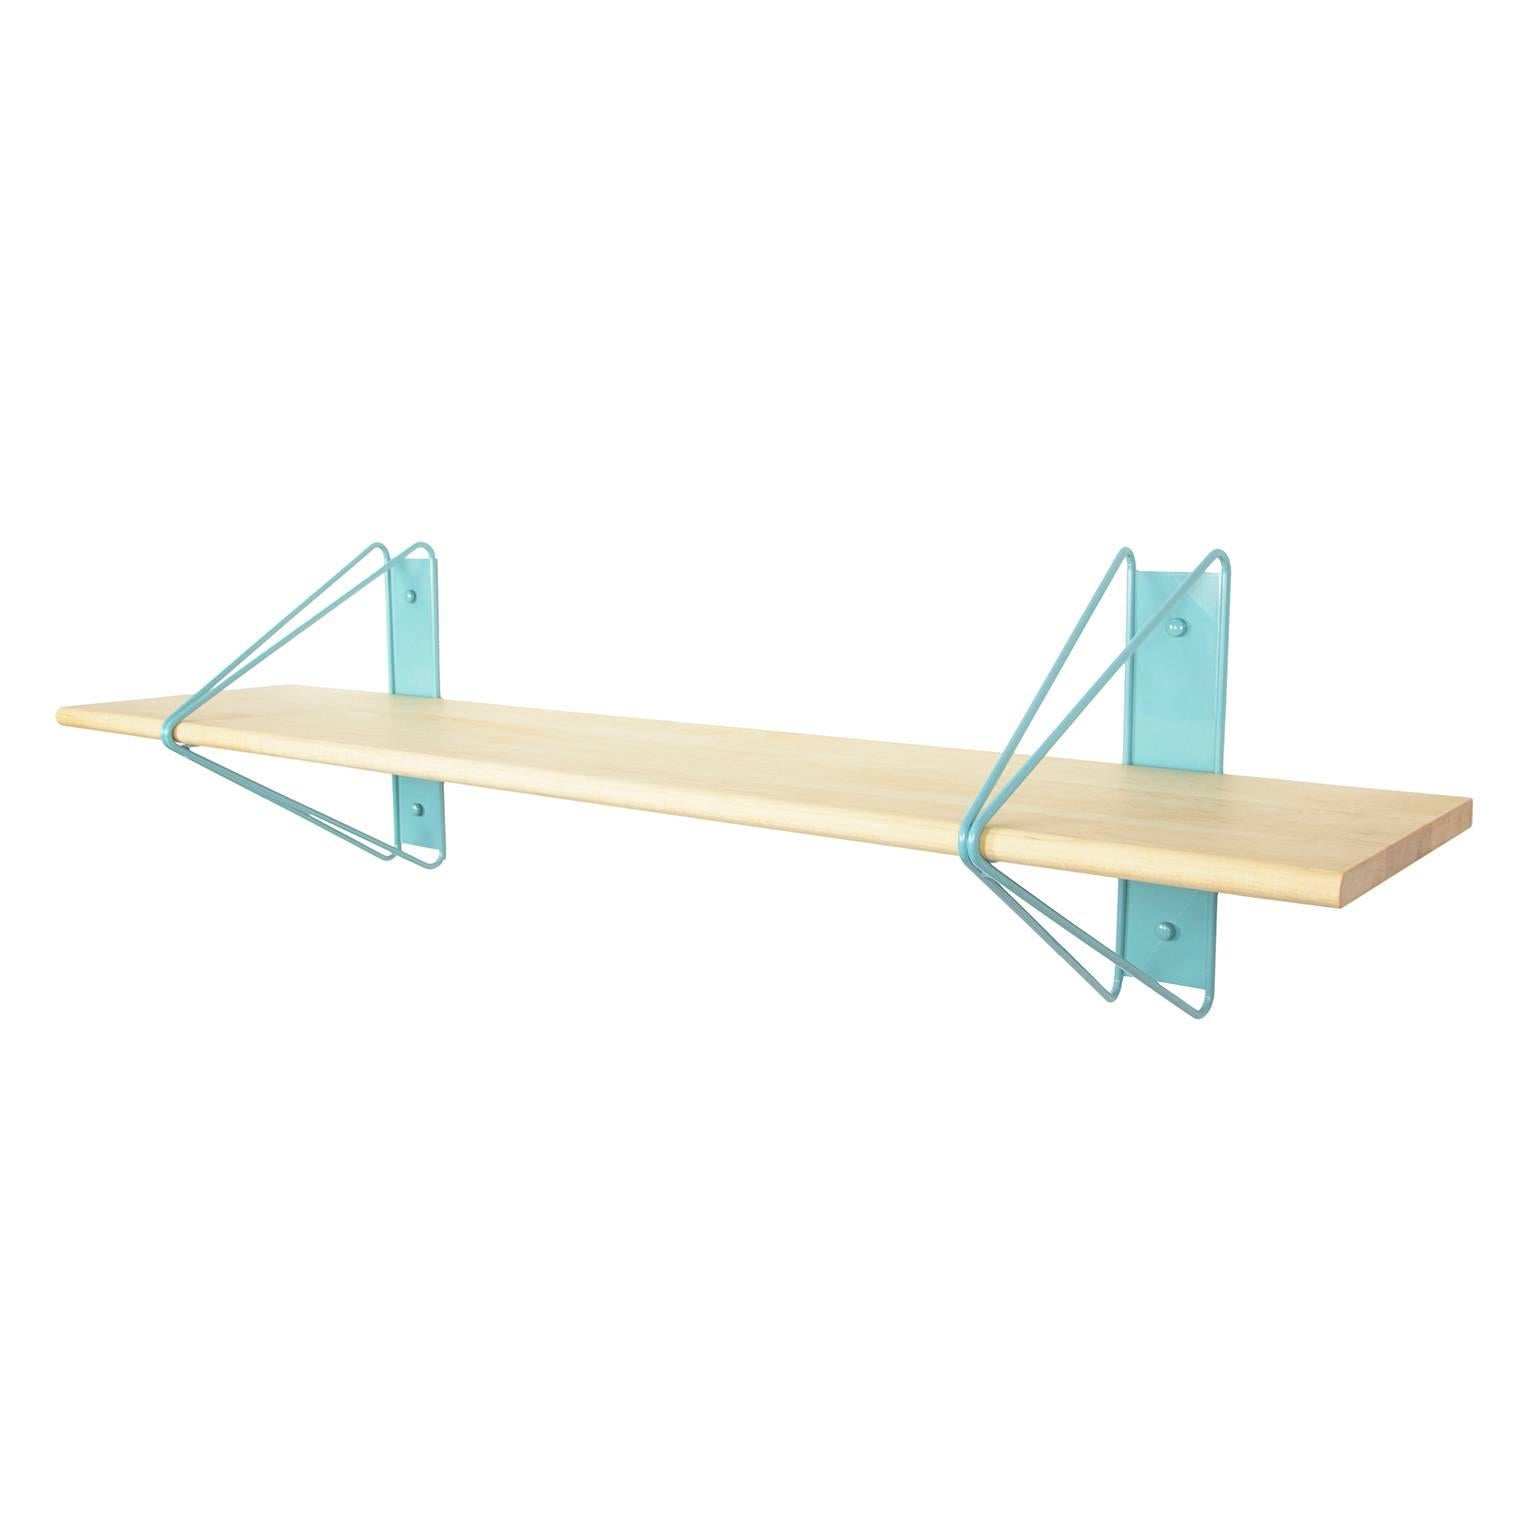 Customizable Strut Shelving System from Souda, Blue & Maple, Made to Order